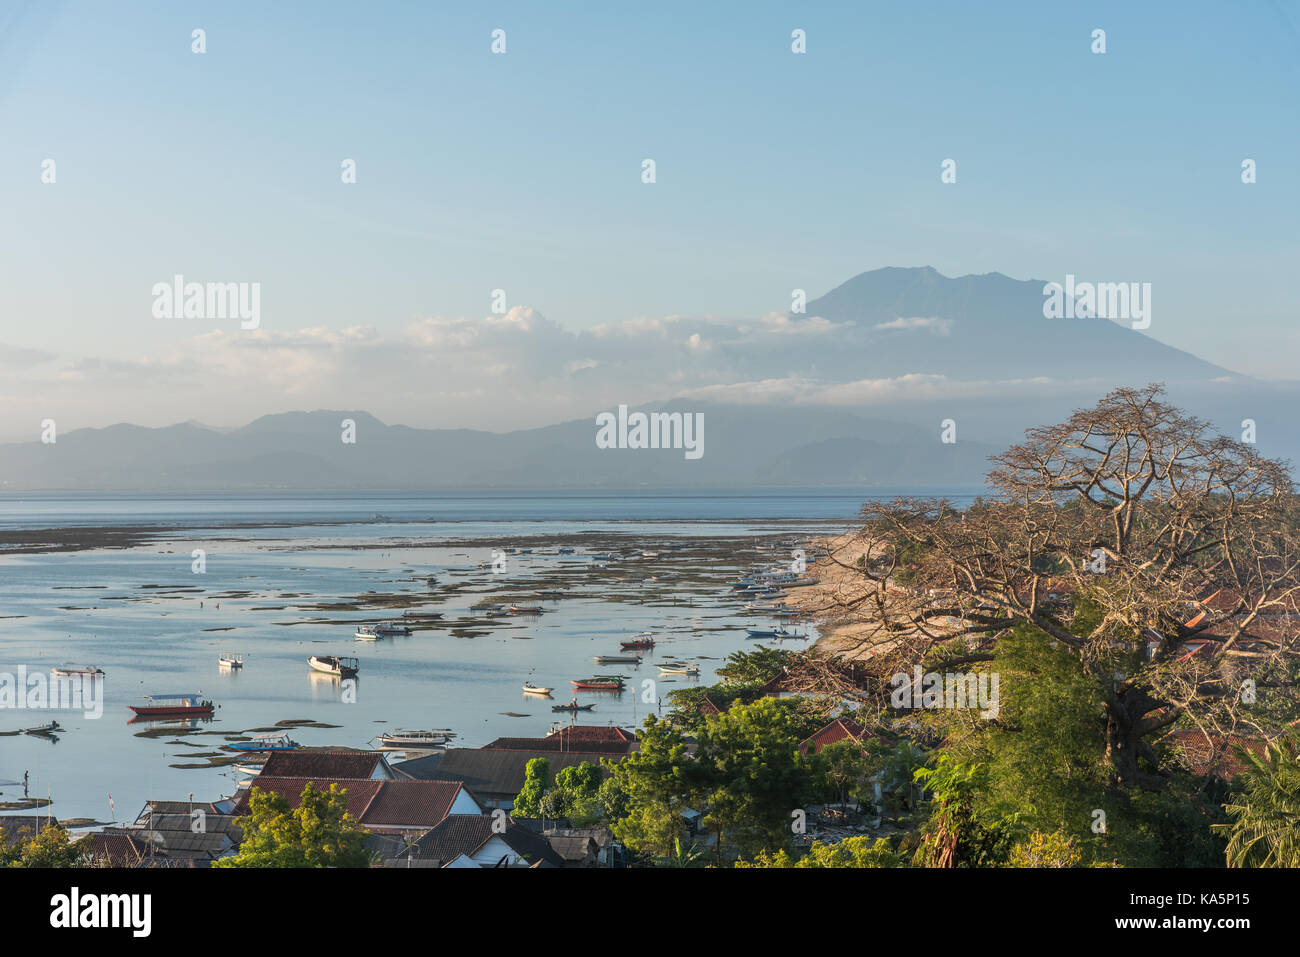 Beautiful view from Panorama point on the island Nusa Lembongan over Jungut Batu beach and the rumbling Vulcan Agung on Bali Indonesia Stock Photo